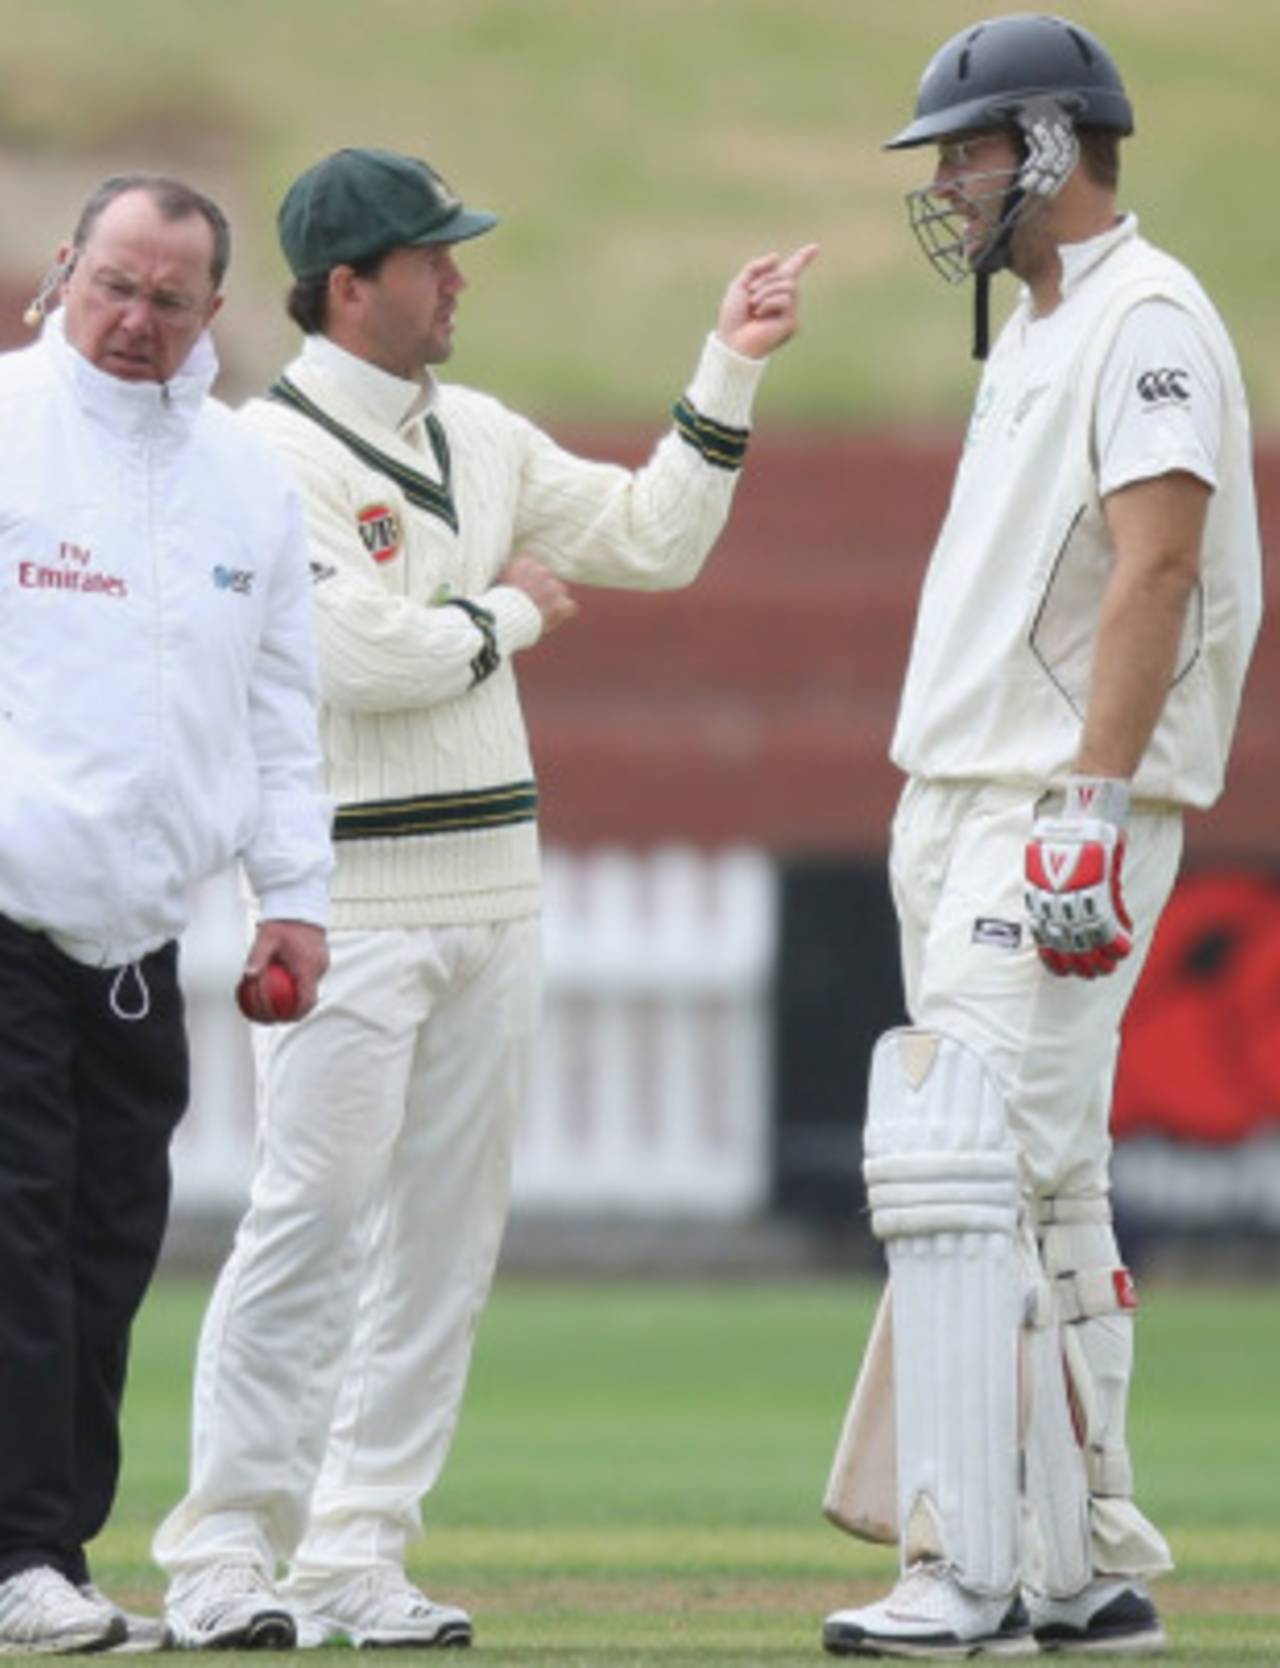 Ricky Ponting speaks with Daniel Vettori after the wind stopped the use of some of the cameras for referral decisions, New Zealand v Australia, 1st Test, 4th day, Wellington, March 22, 2010